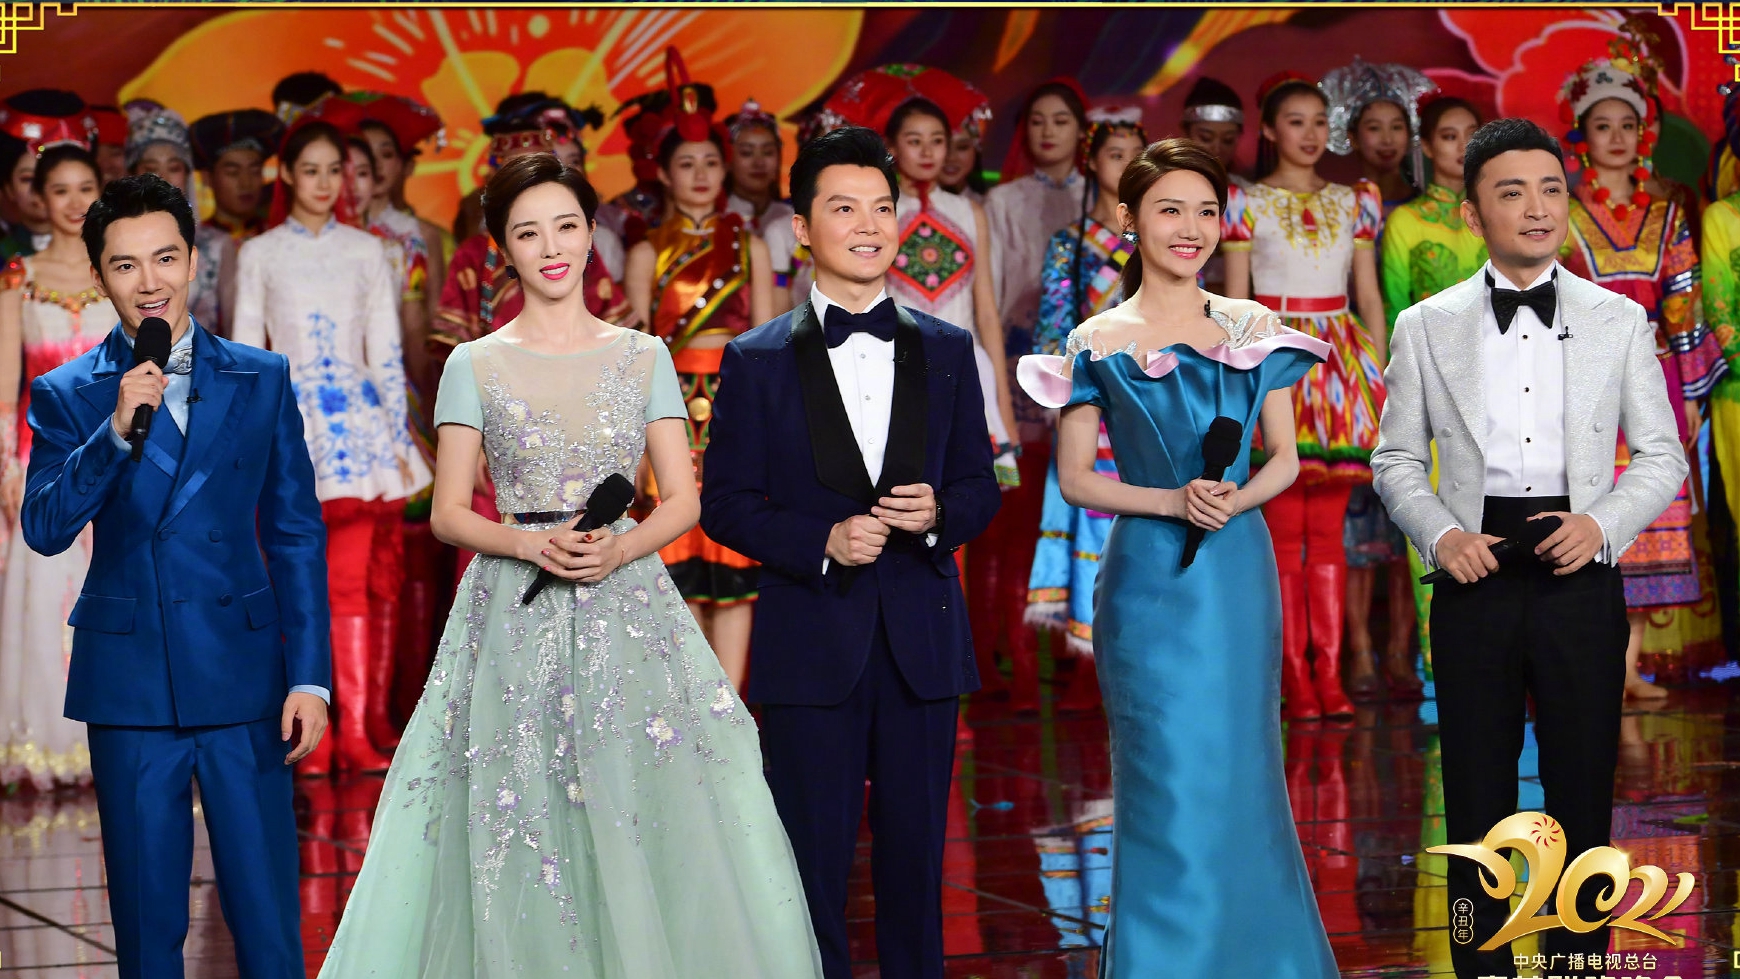 2021 Spring Festival Gala attracts over 1.2 billion viewers CGTN